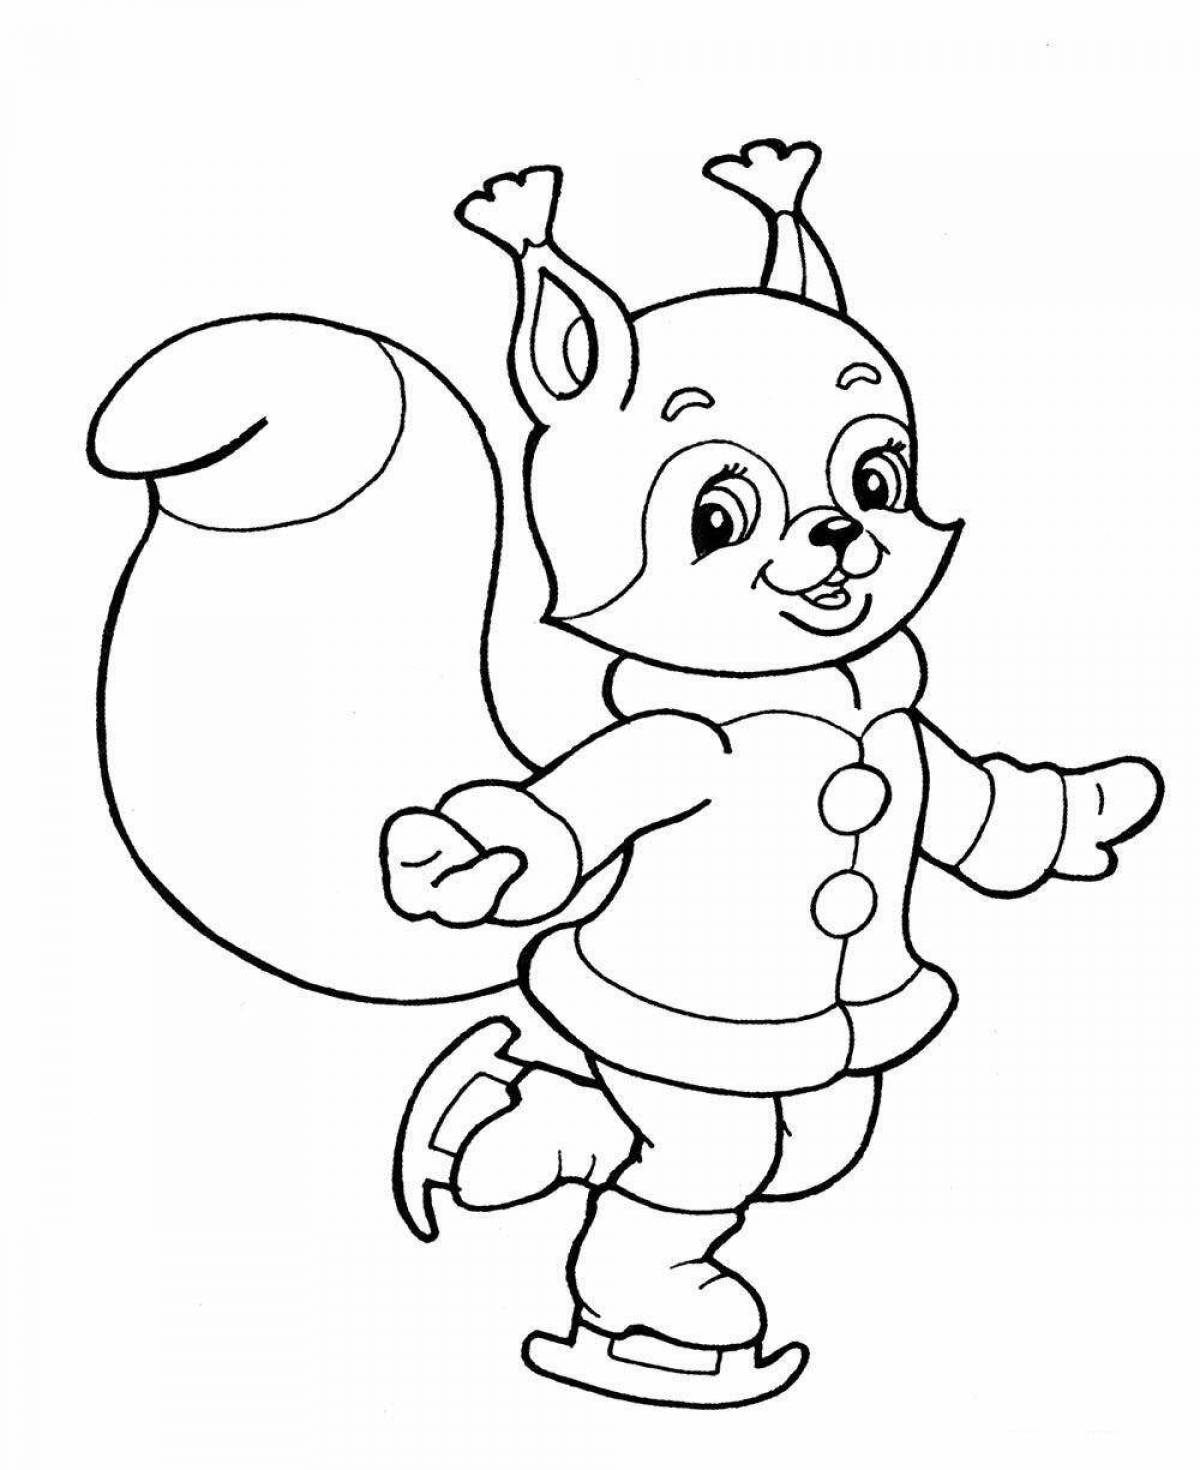 Bright coloring squirrel for children 3-4 years old